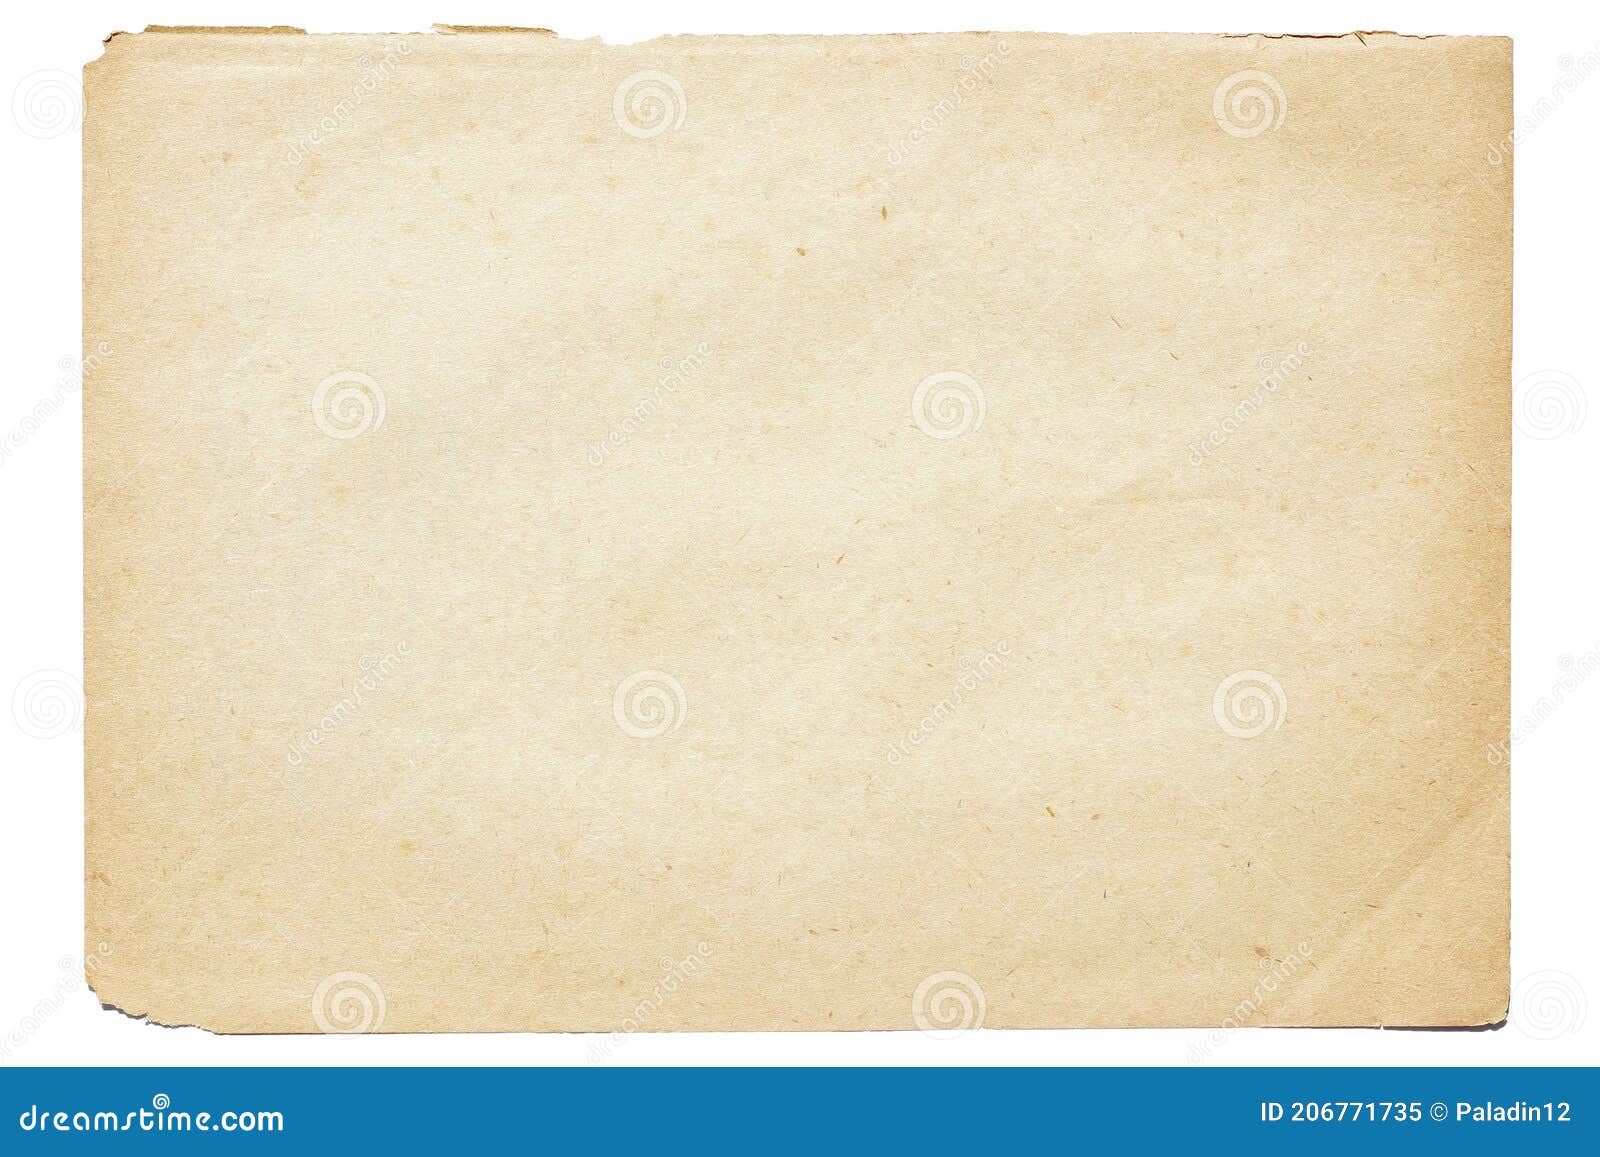  old brown worn out ripped yellow background paper texture with stain